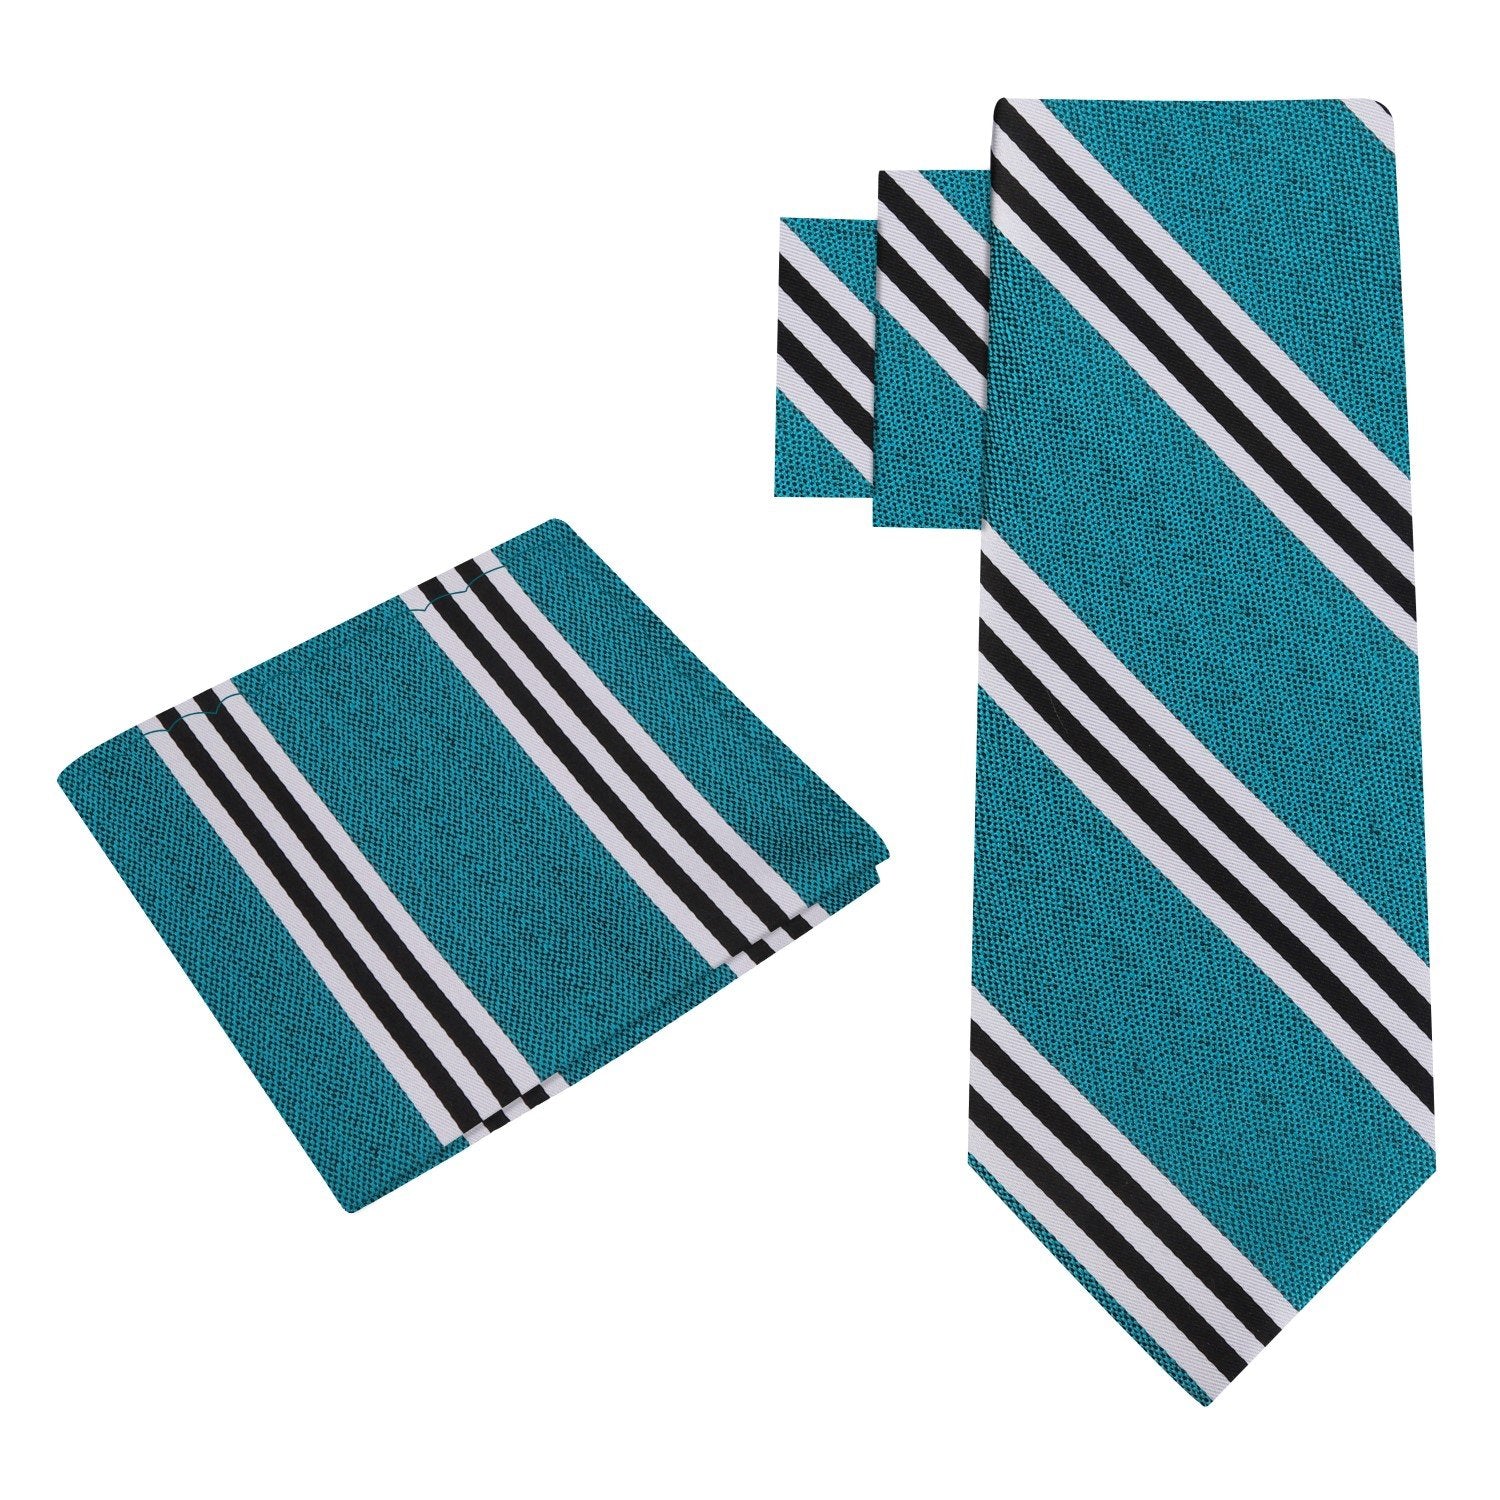 Alt View: Teal, White, Black Stripe Tie and Square